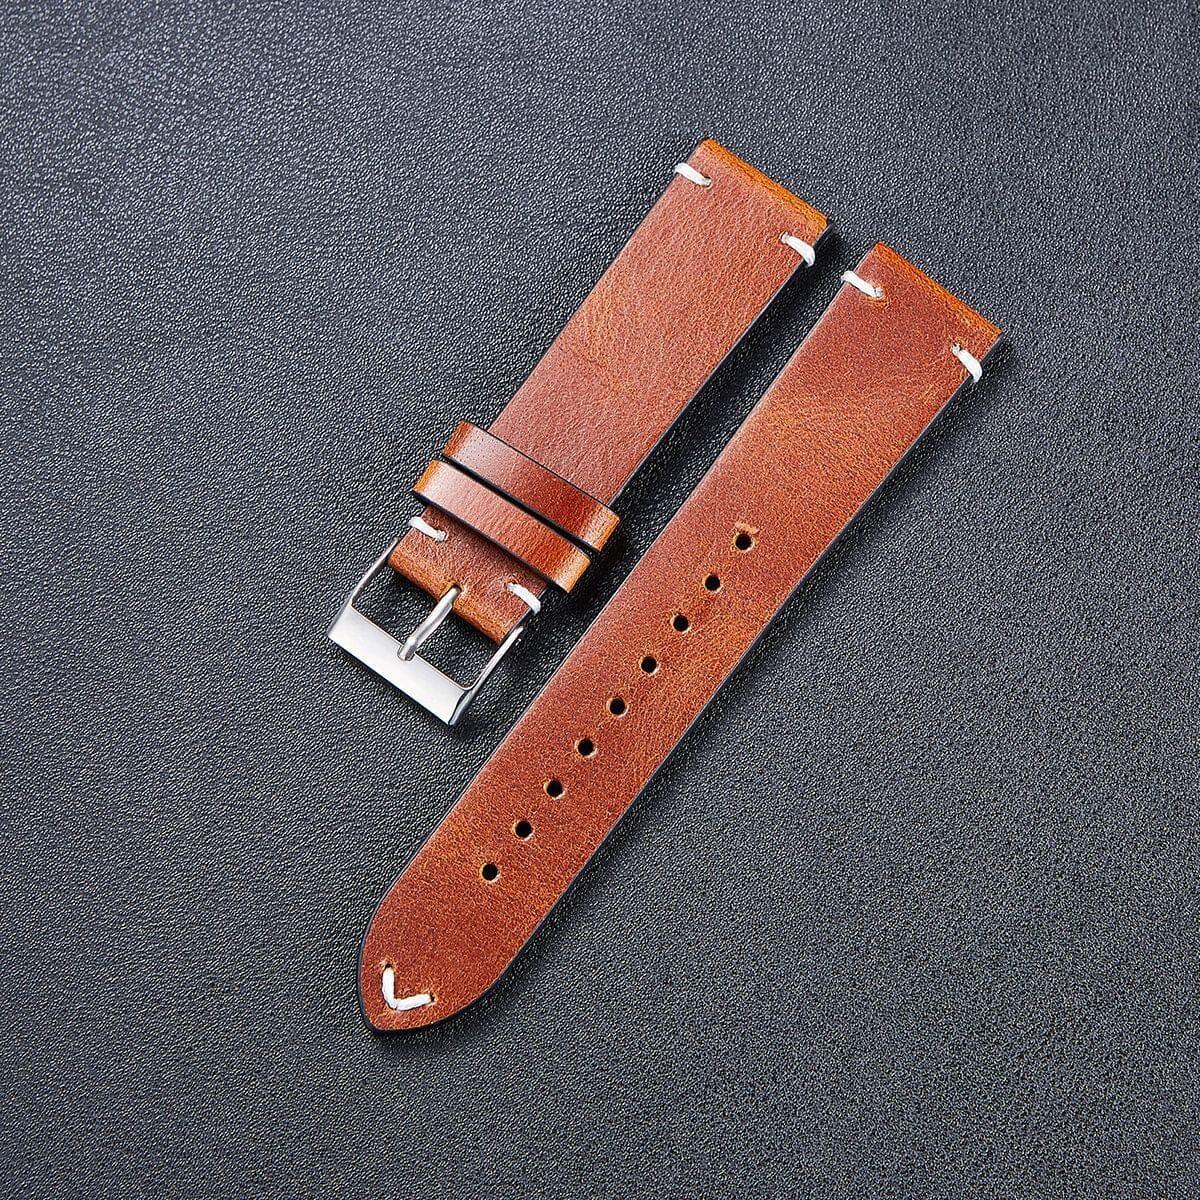 Vintage Oiled Leather Watch Straps Compatible with the Wenger 22mm Range